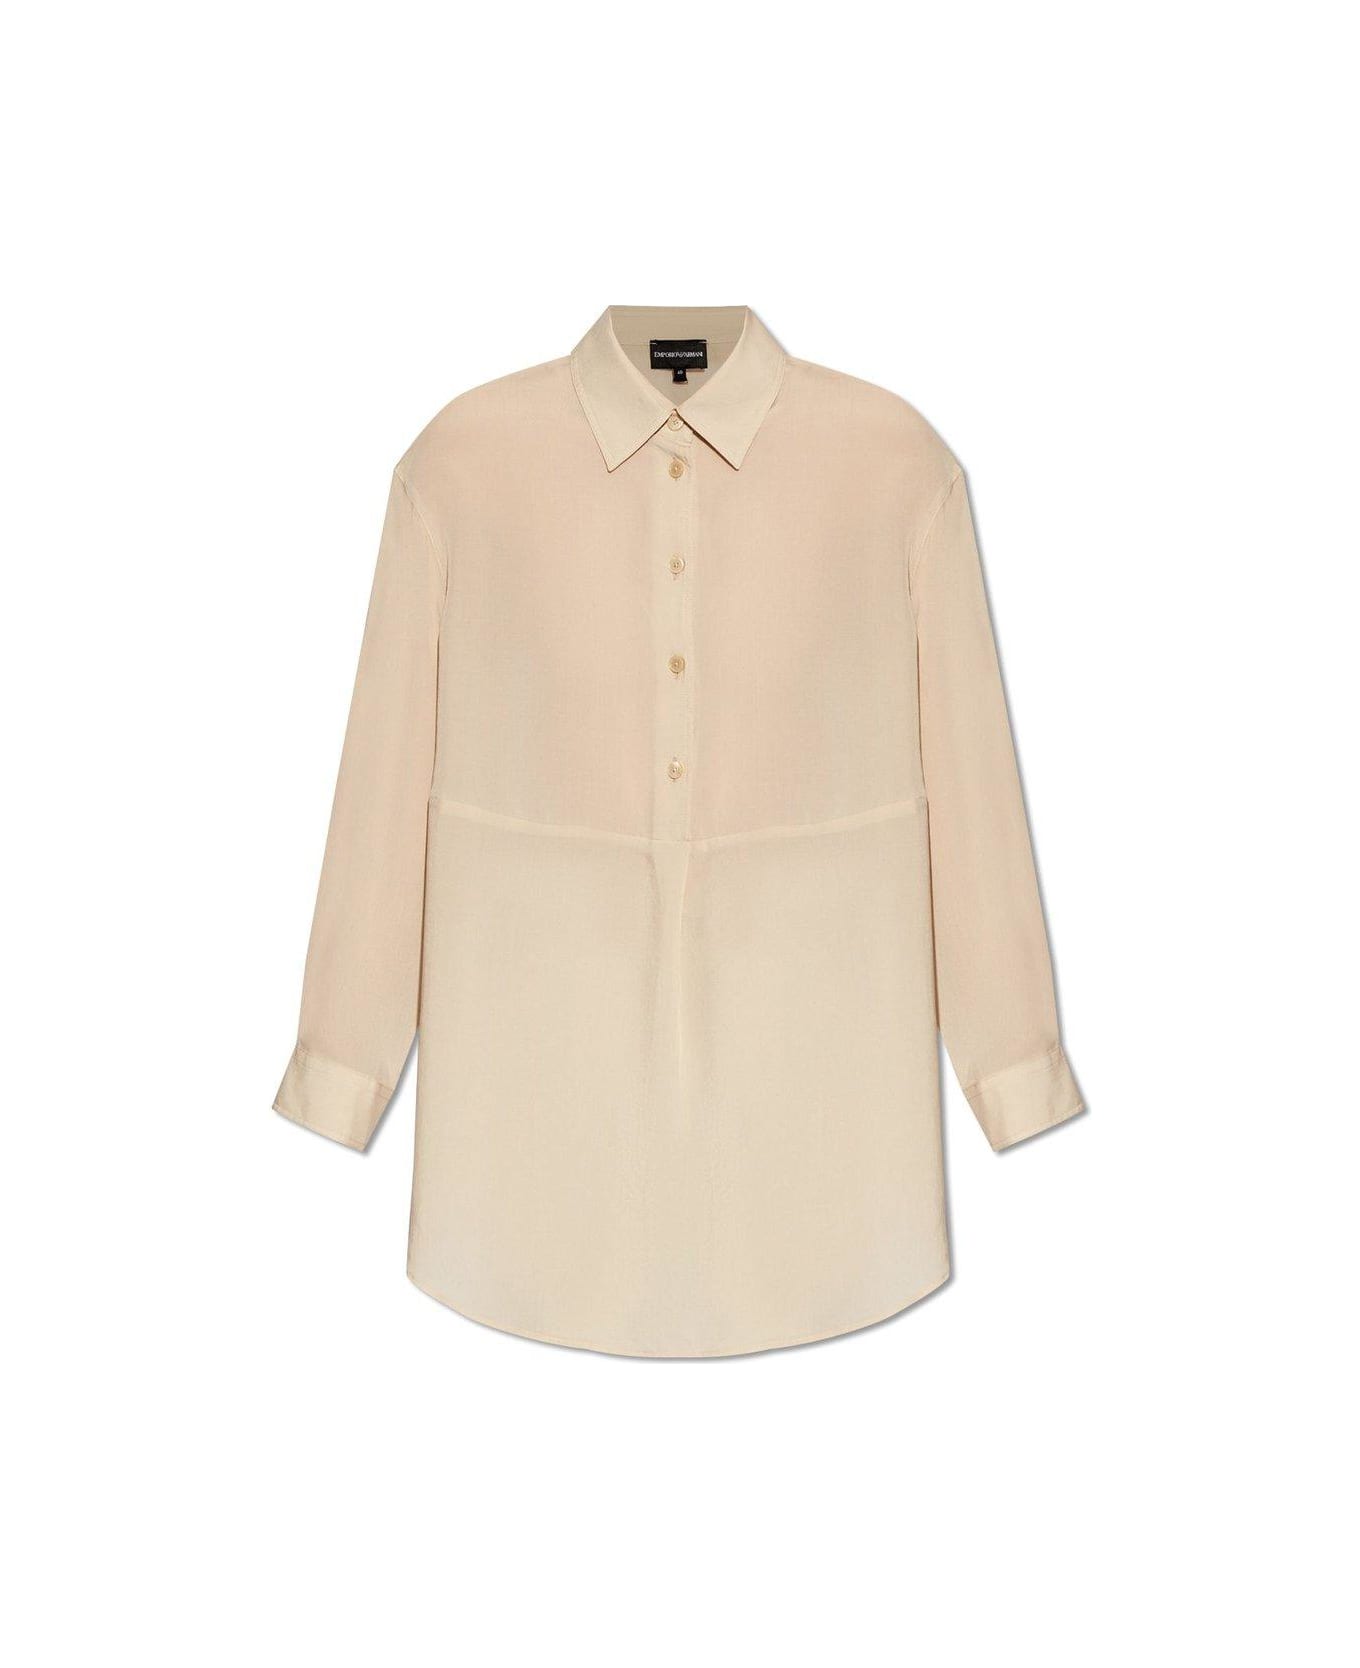 Emporio Armani Relaxed Fitting Top - Beige